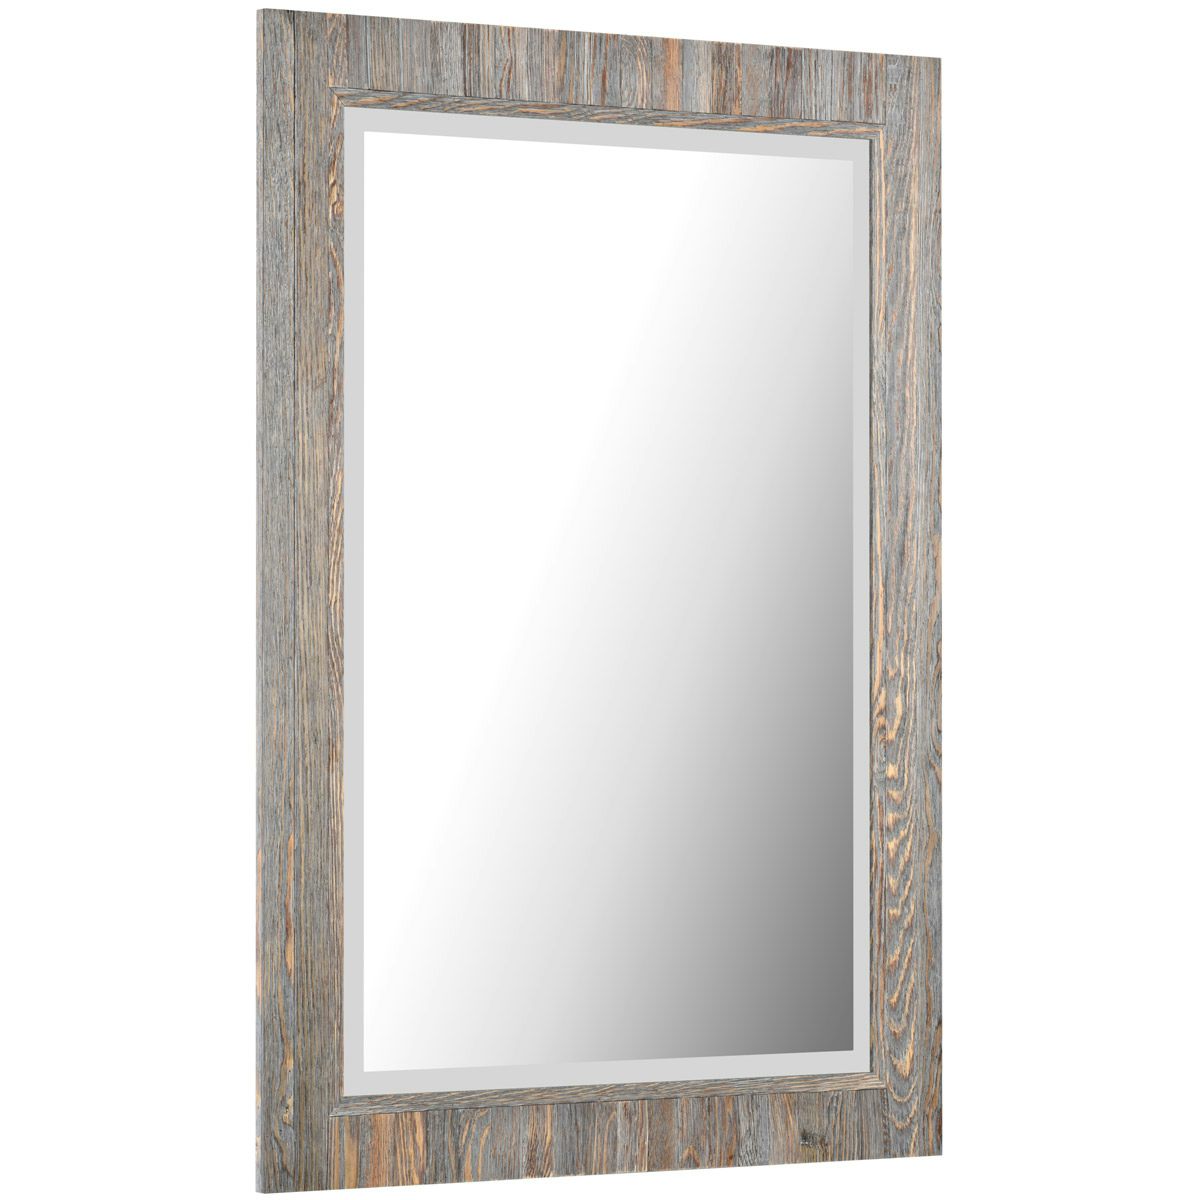 Accents Driftwood mirror